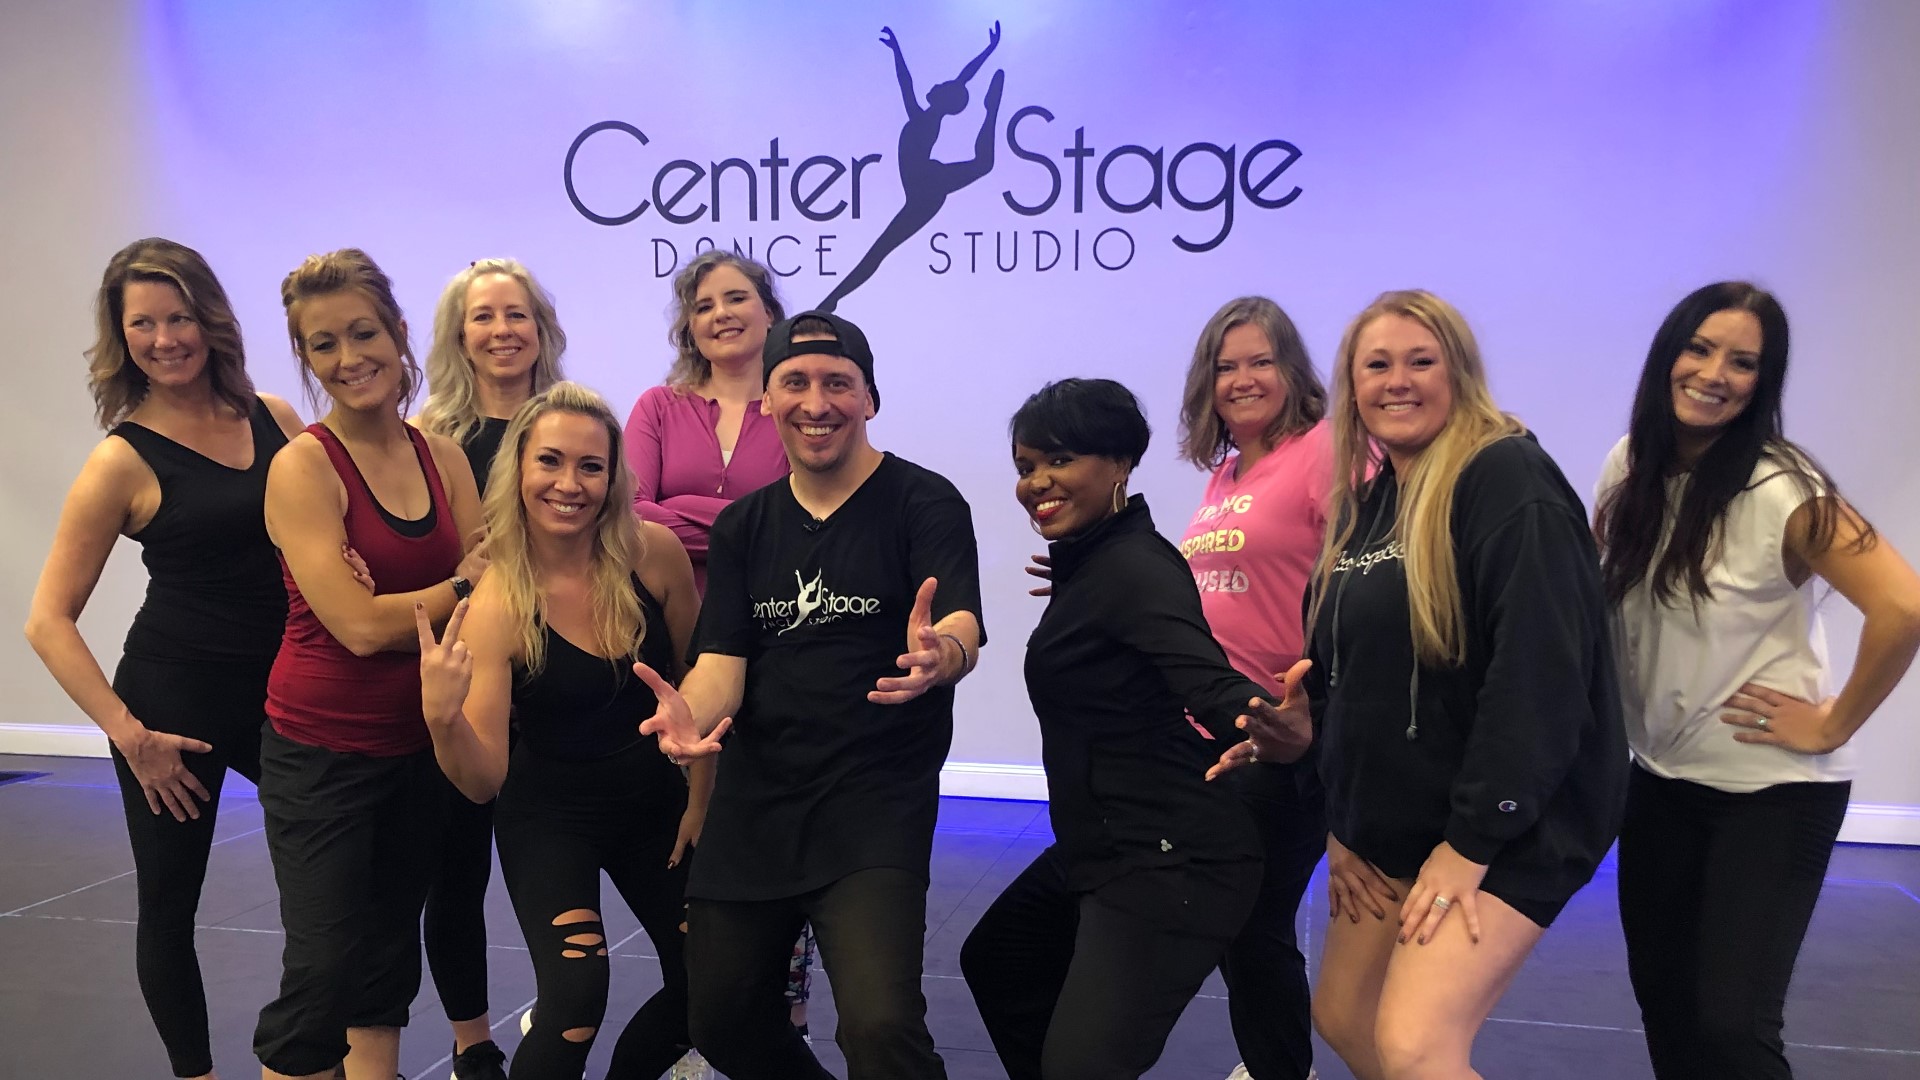 The studio survived COVID thanks in part to its director, 30-year-old Mitchel Federan, prioritizing the business his mom opened in 1988 over his own dance career.